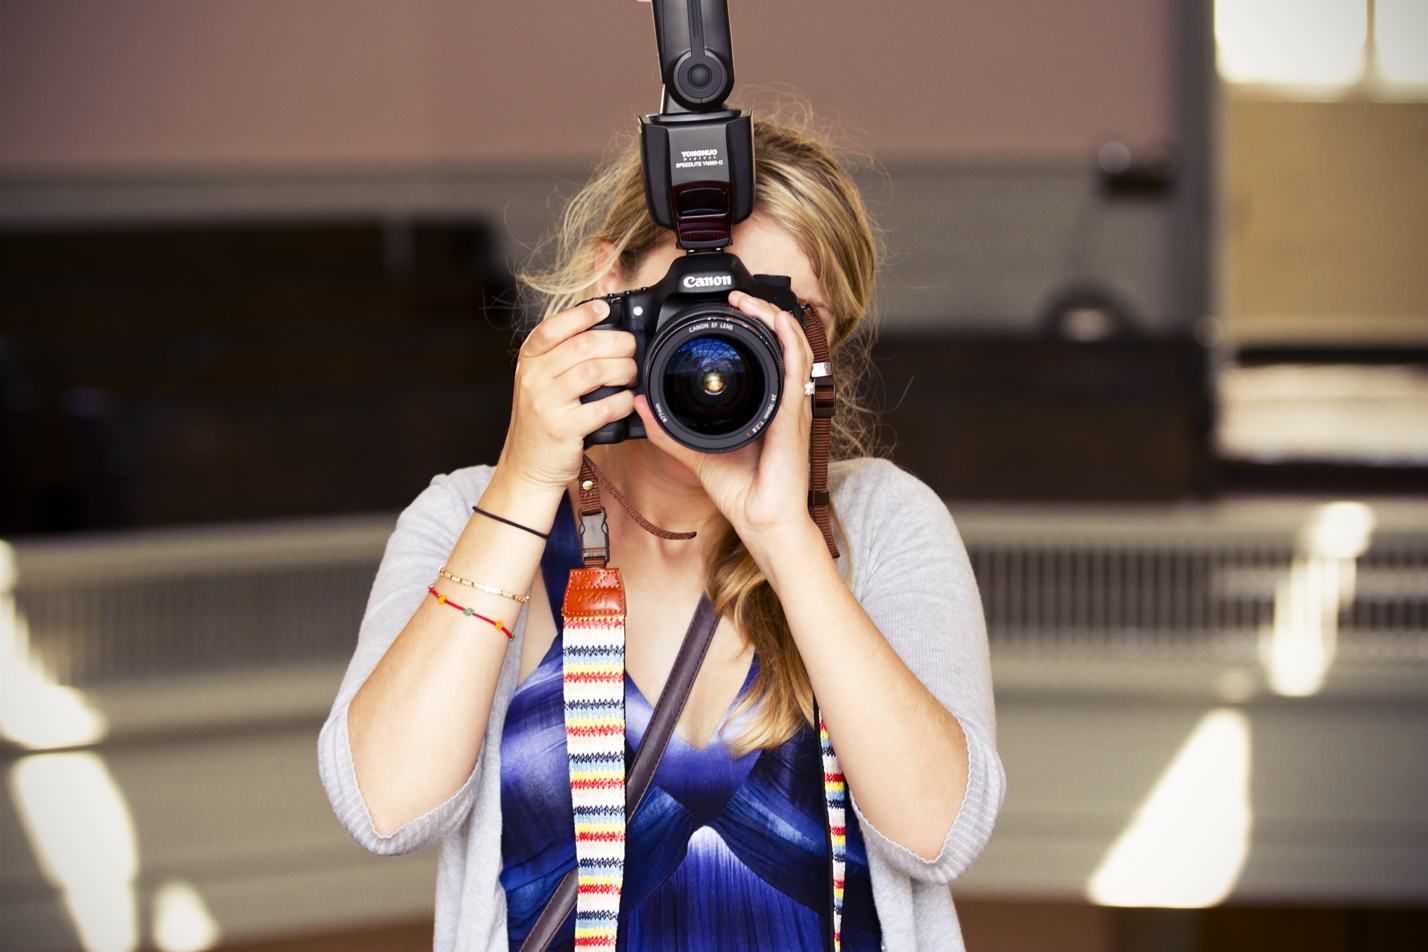 10 Questions to Ask Before Hiring a Wedding Photographer - Image Property of www.j-dphoto.com